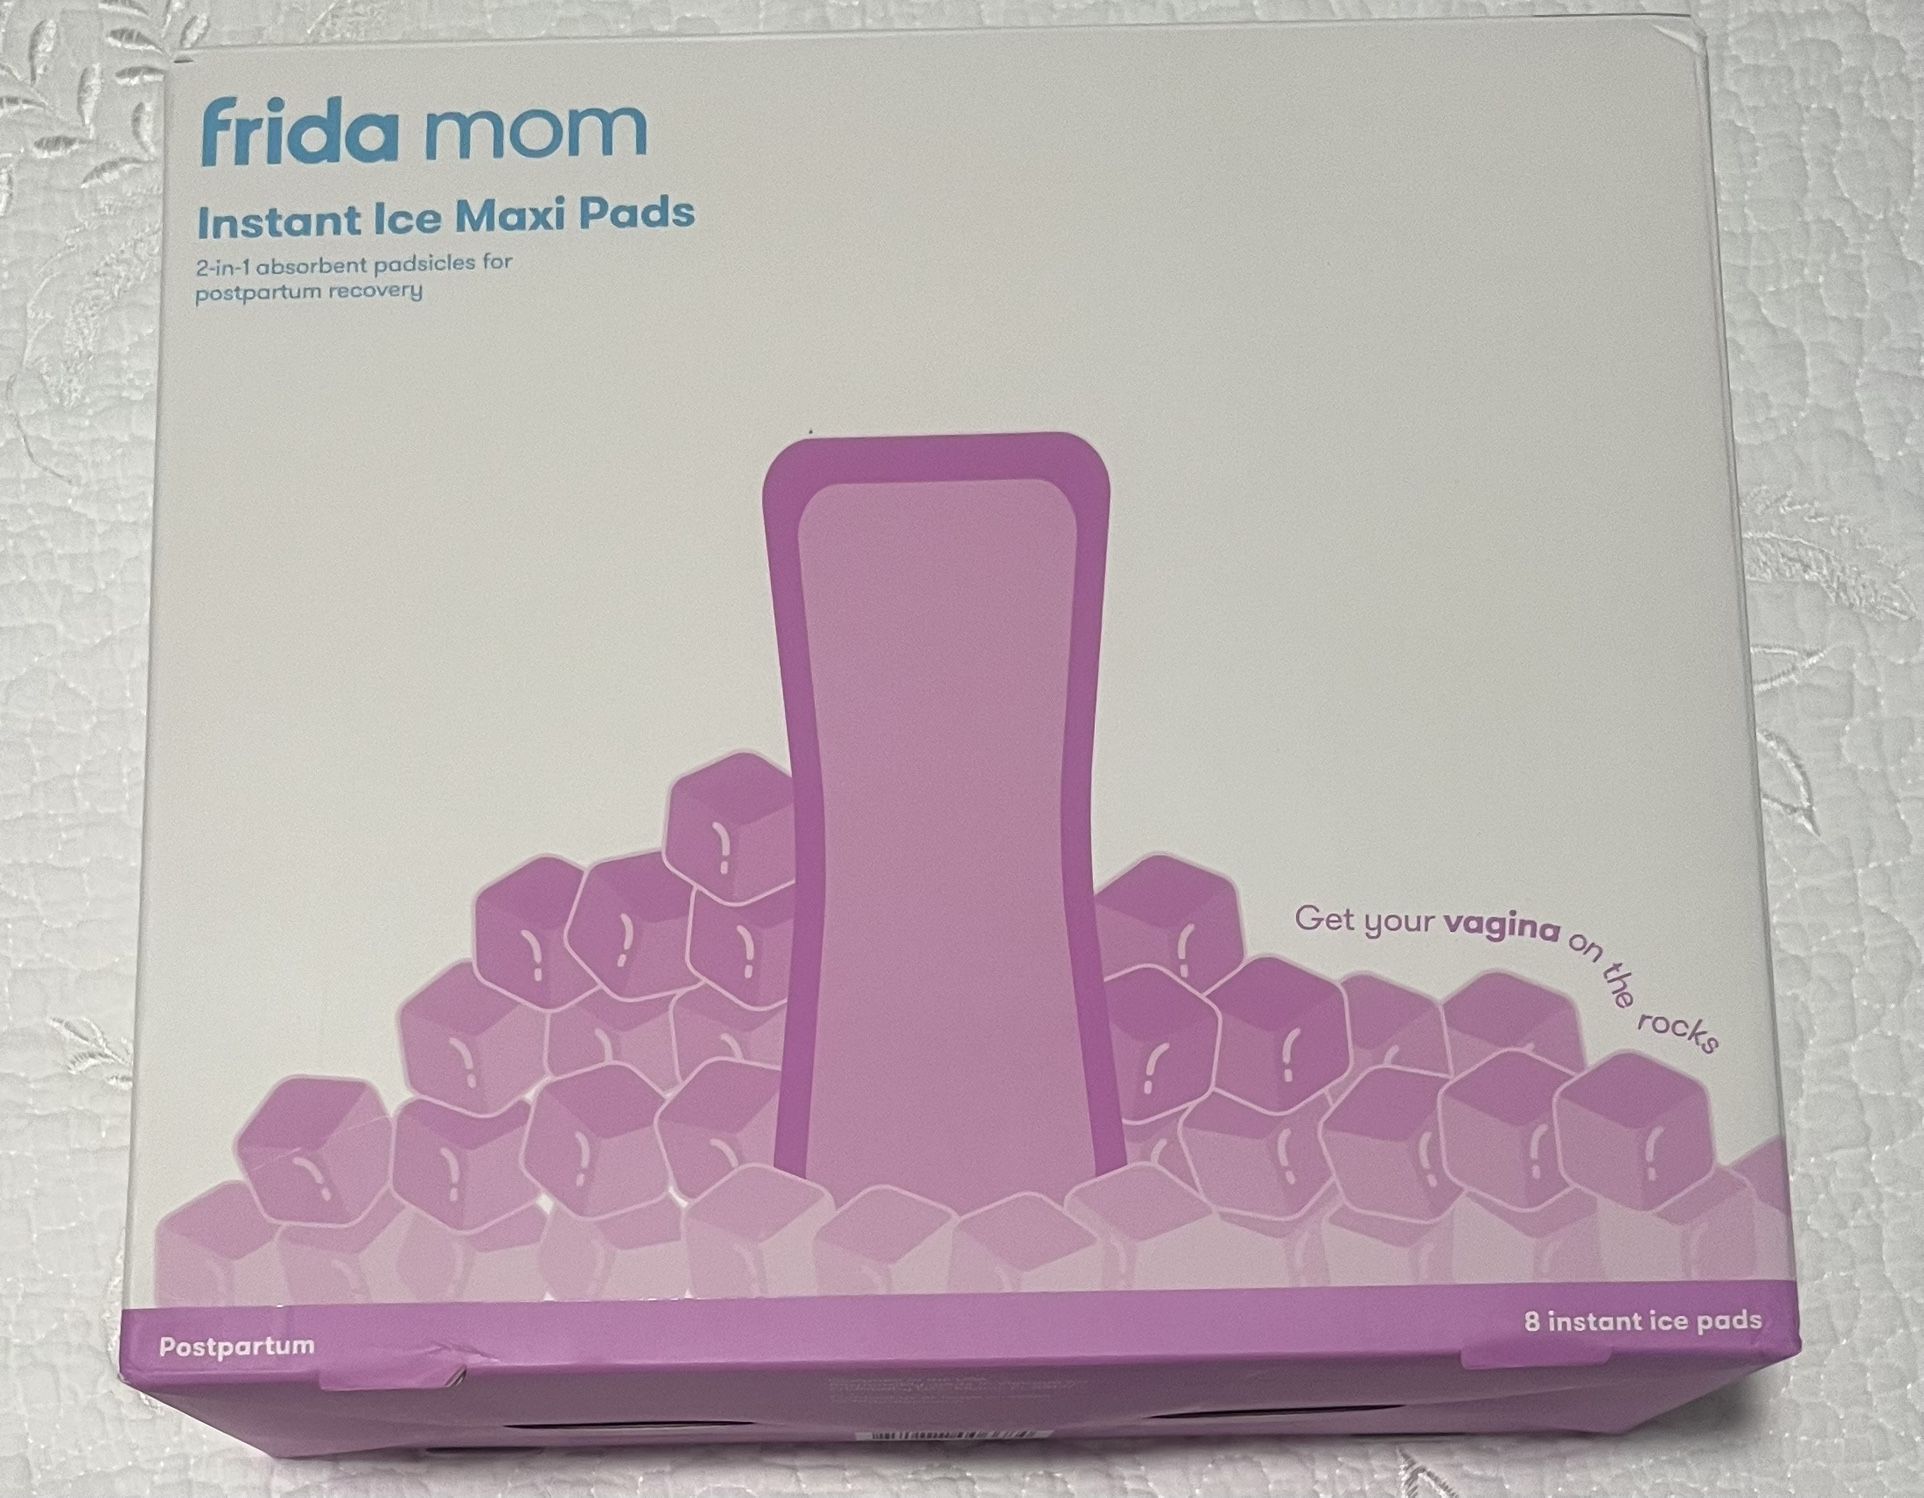 Instant Ice Maxi Pads by Frida